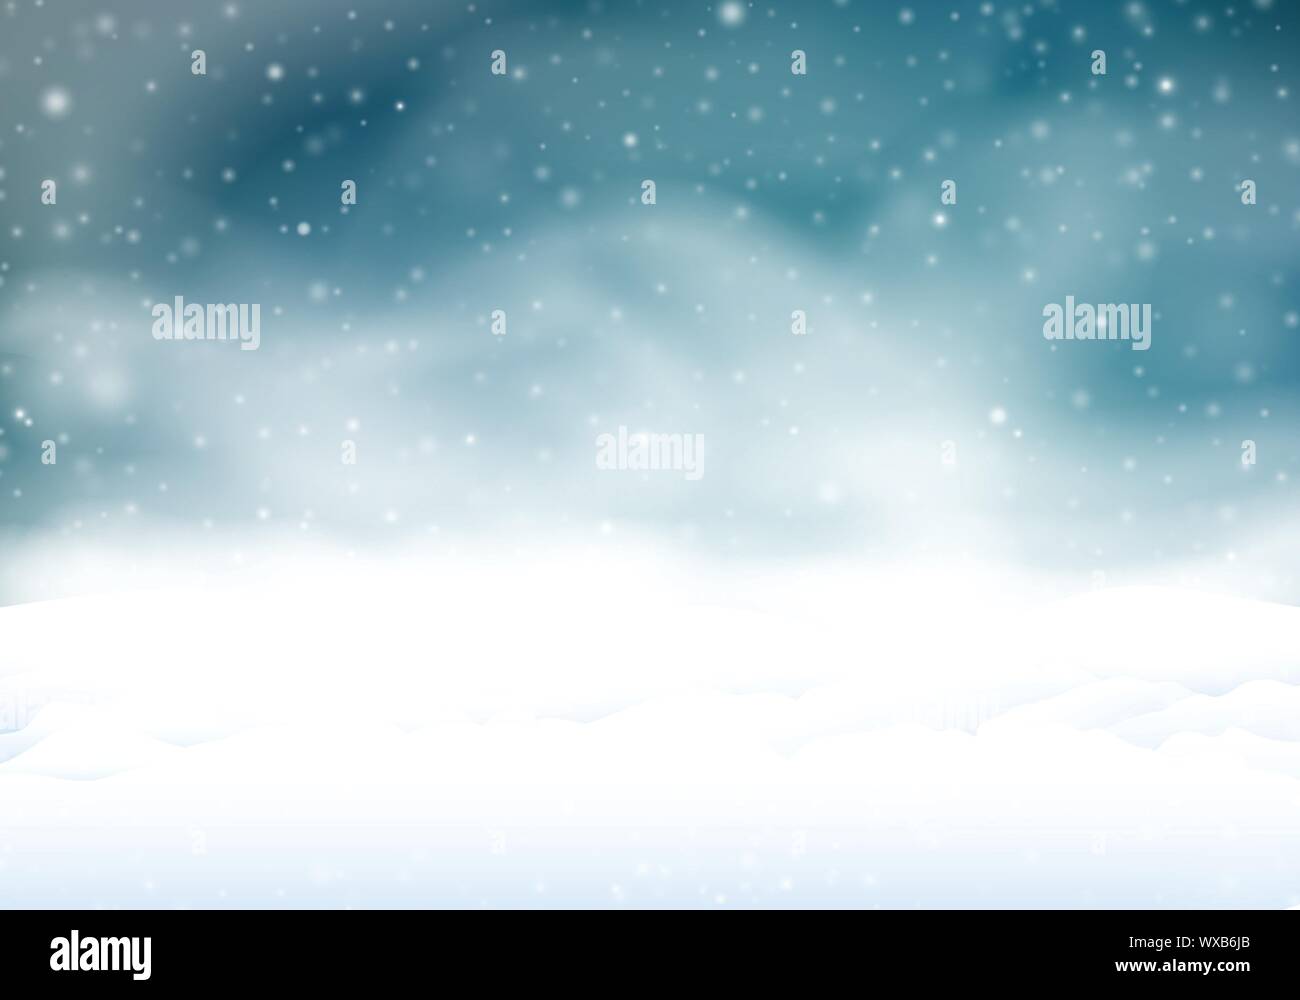 Night winter background with snowstorm. Stock Vector